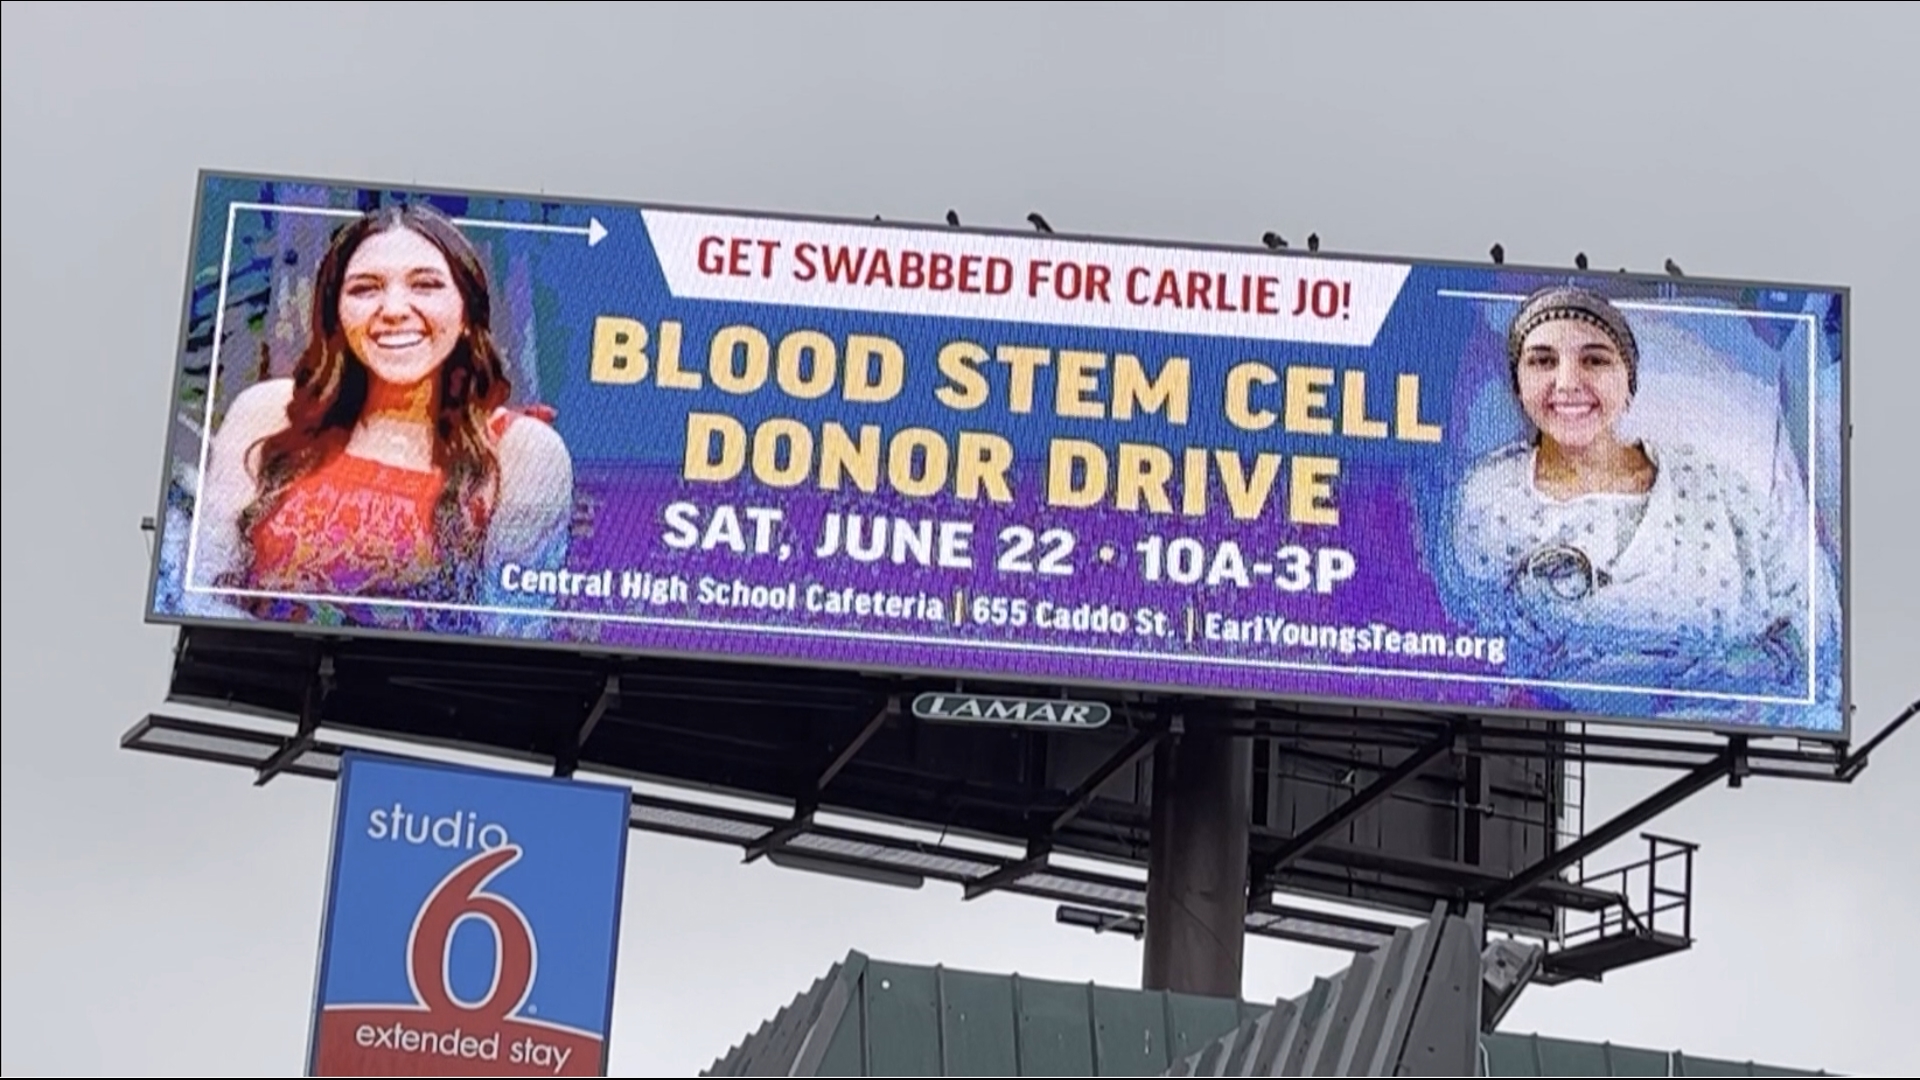 A stem cell drive will be hosted at Central High School's cafeteria to find an exact match for Carlie Jo Johnson, who is currently battling leukemia.